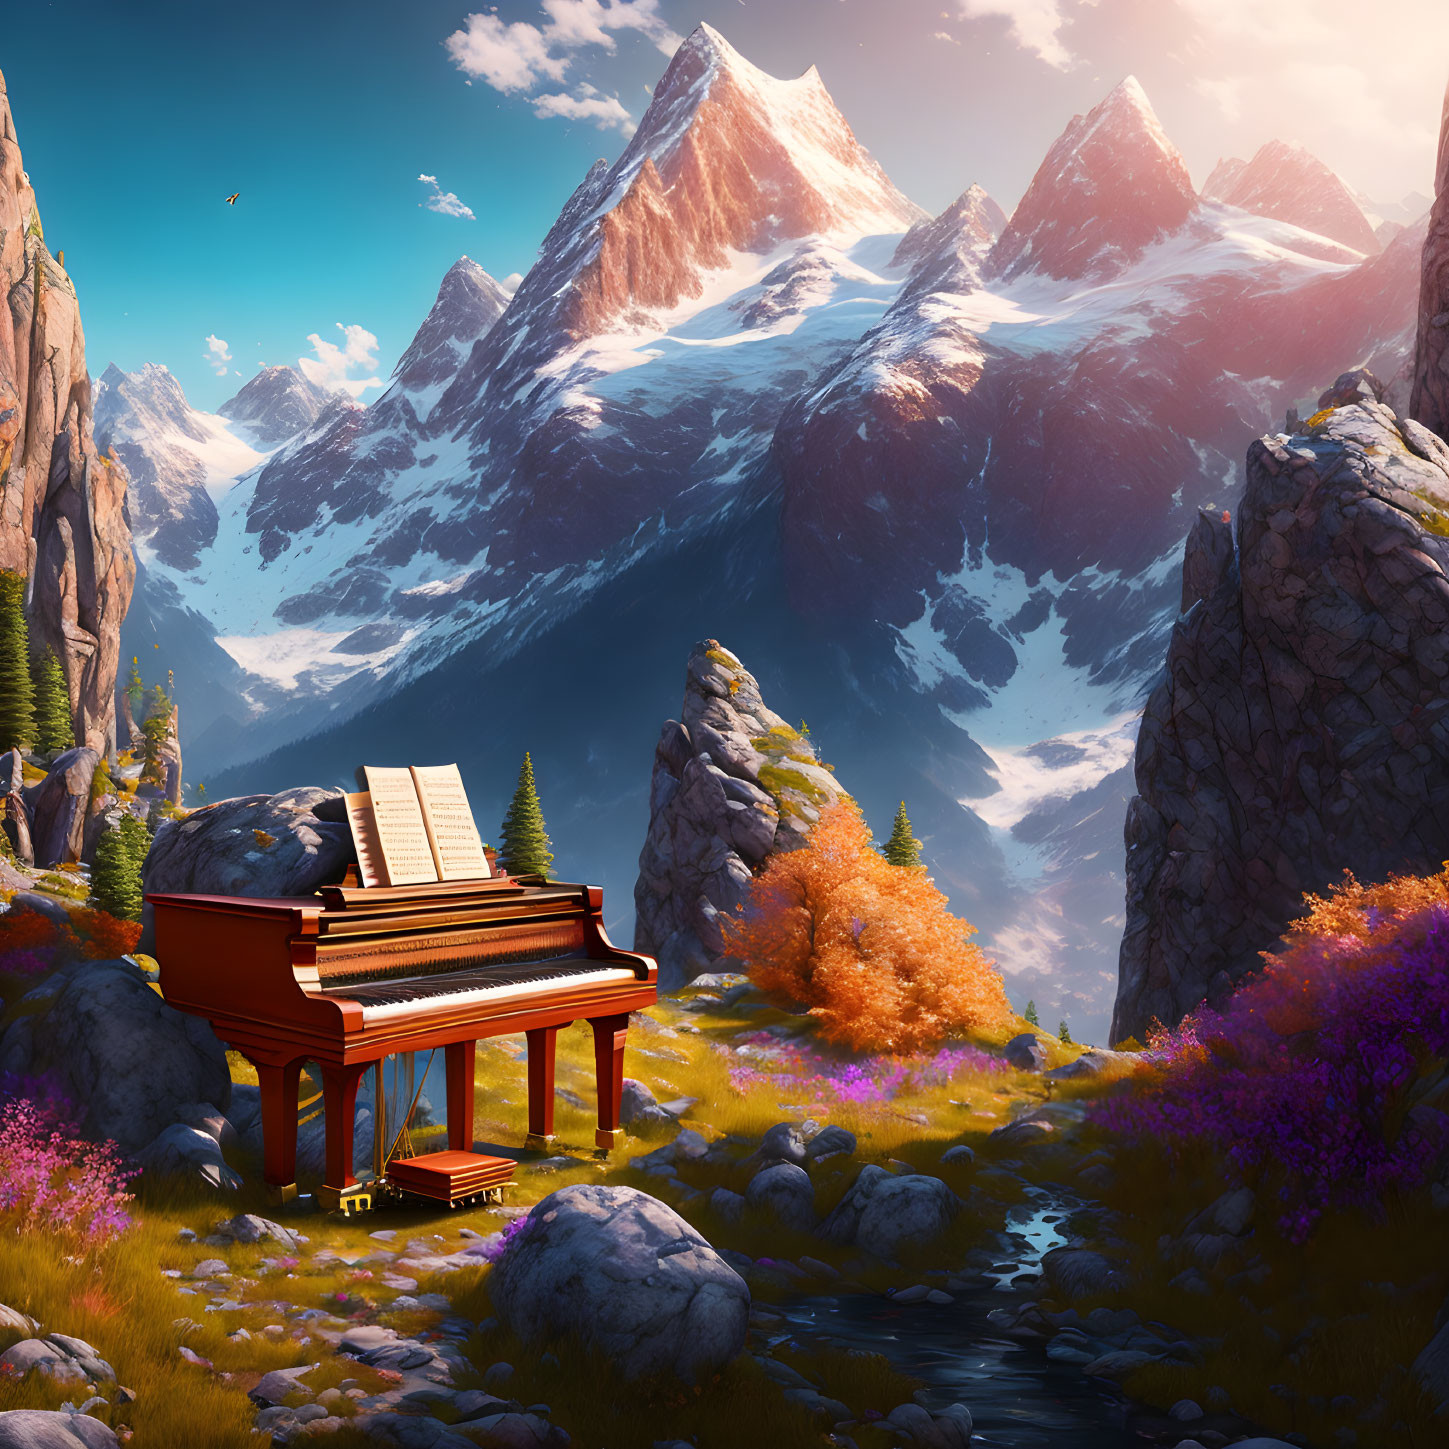 Travel to the mountain's whith a piano